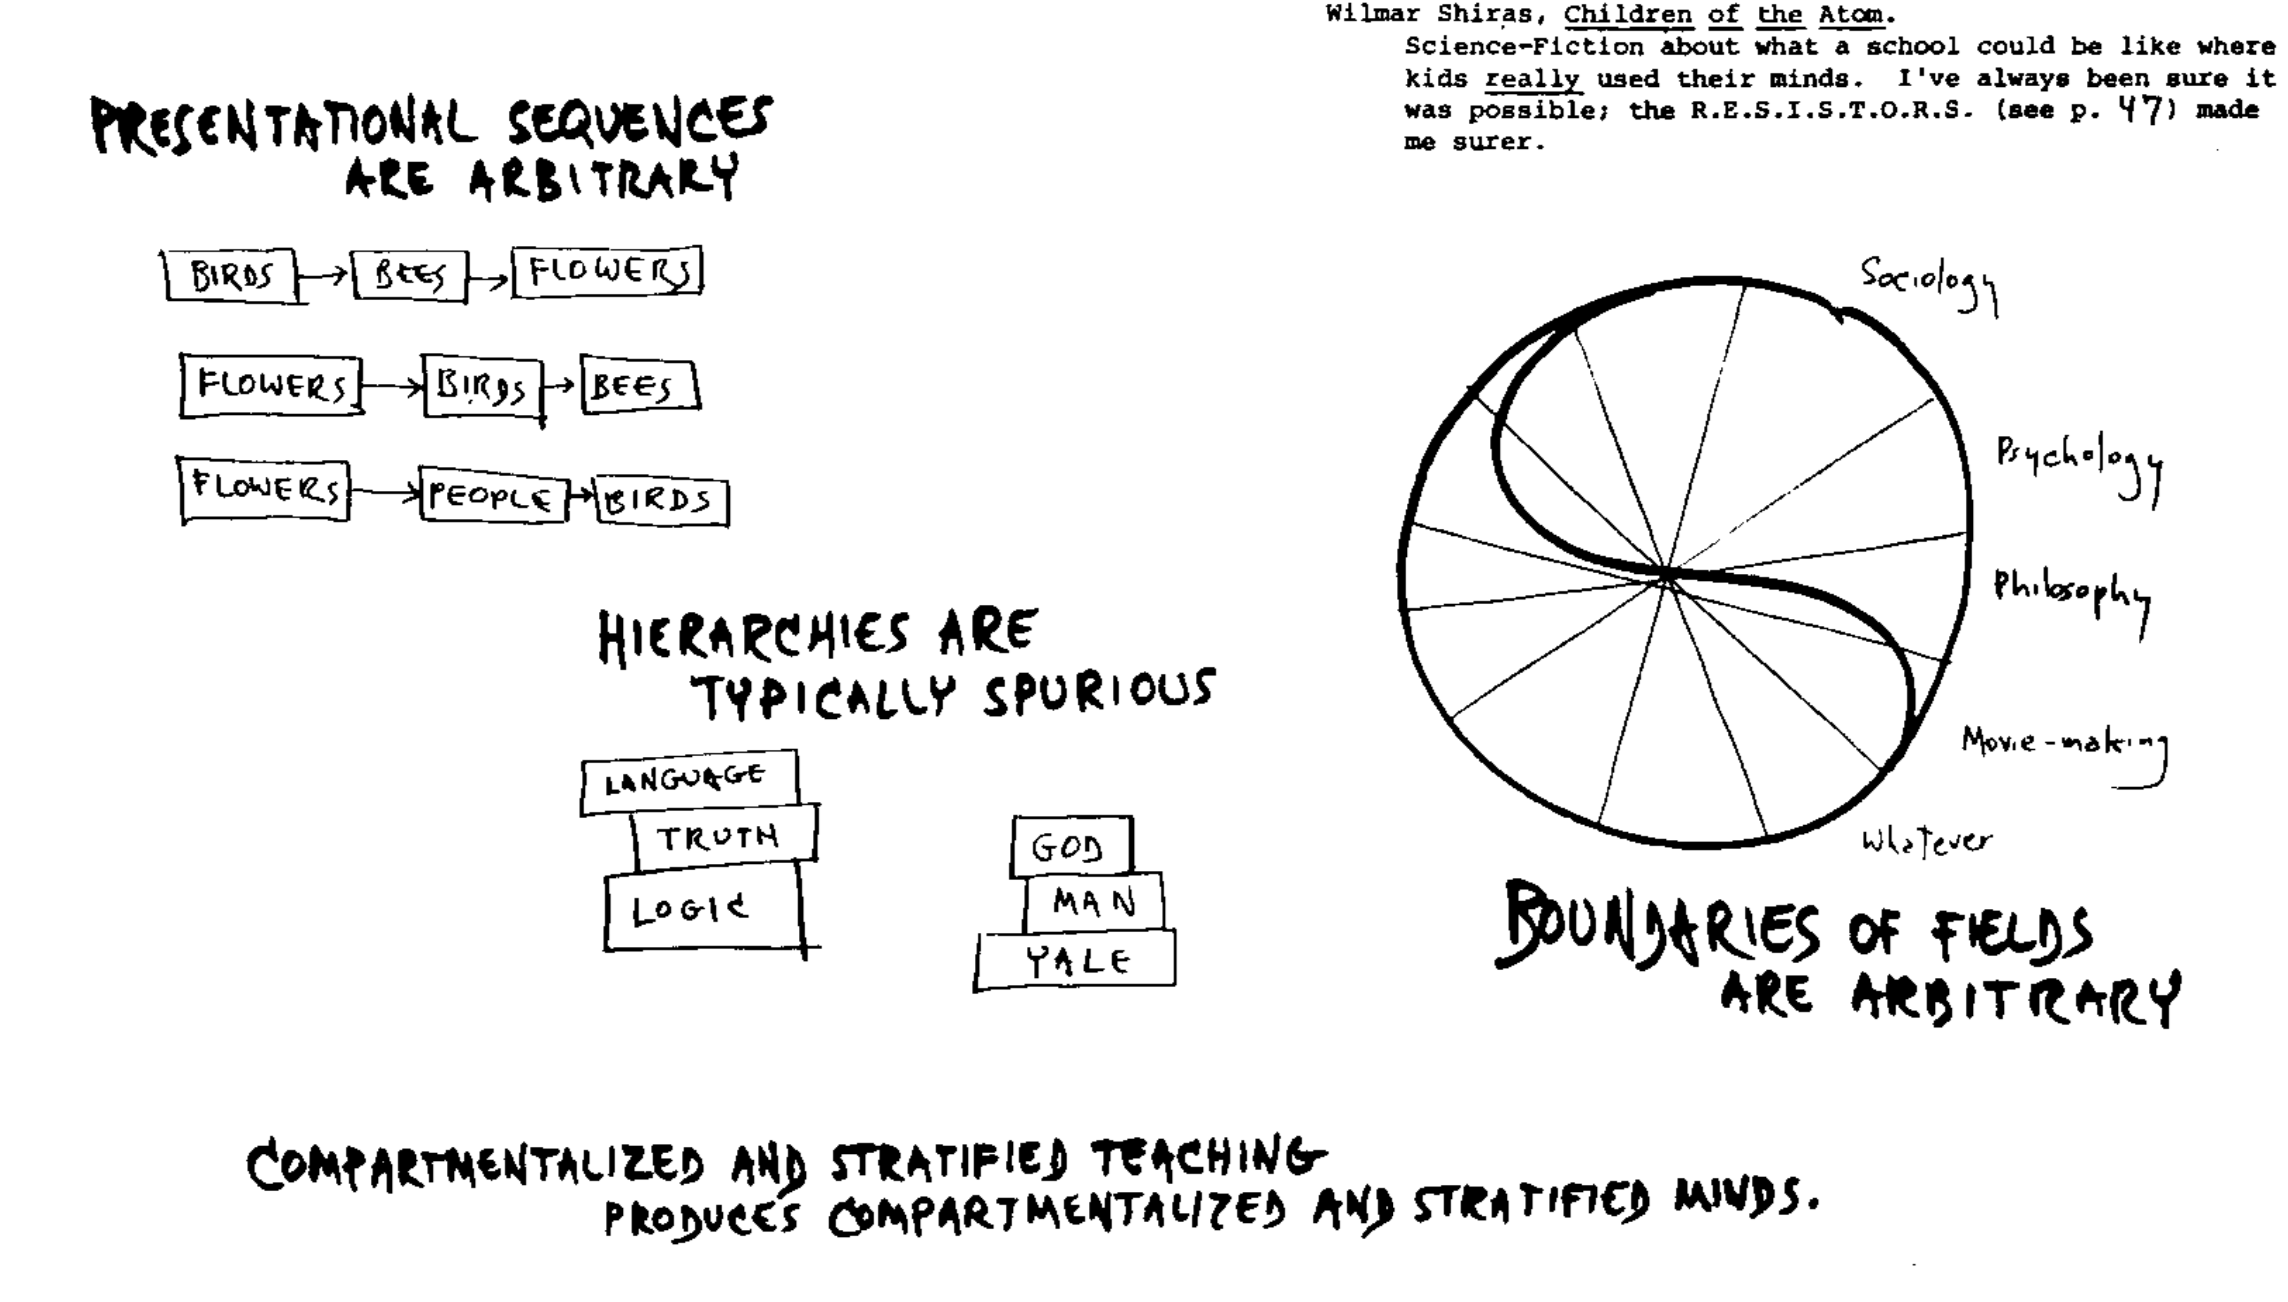 A screenshot of Computer Lib / Dream Machines by Ted Nelson. There are simple hand-drawn diagrams with labels that say "Presentational sequences are arbitrary", "Hierarchies are typically spurious" and "Boundaries of fields are arbitrary".